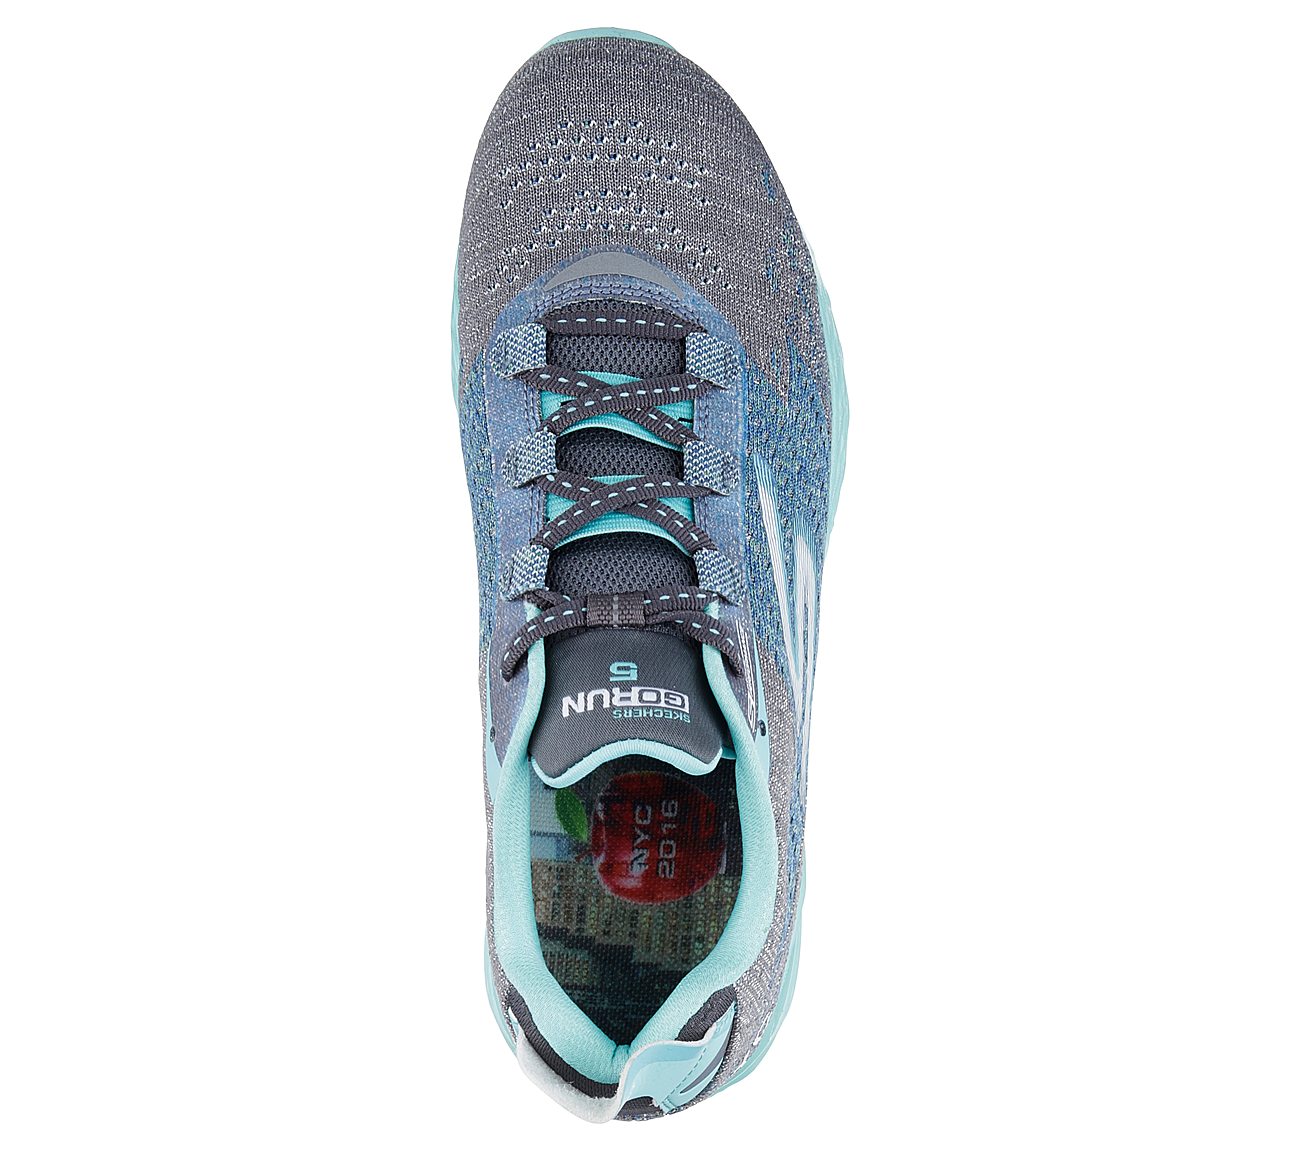 skechers synergy 2.0 mujer 2016